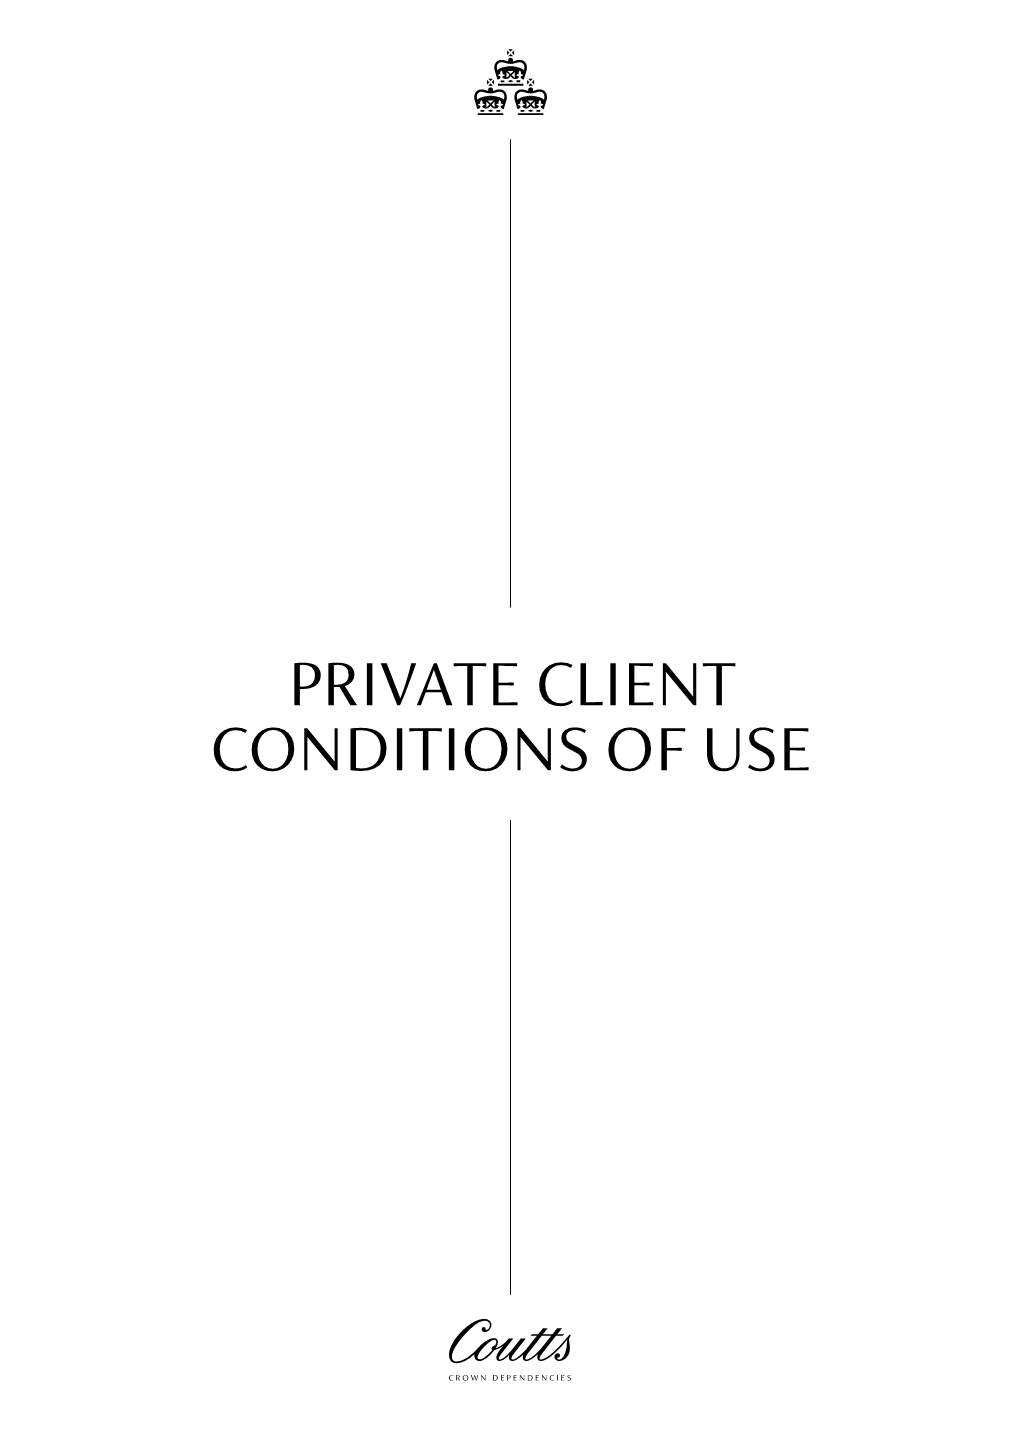 PRIVATE CLIENT CONDITIONS of USE Private Client Conditions of Use CONTENTS